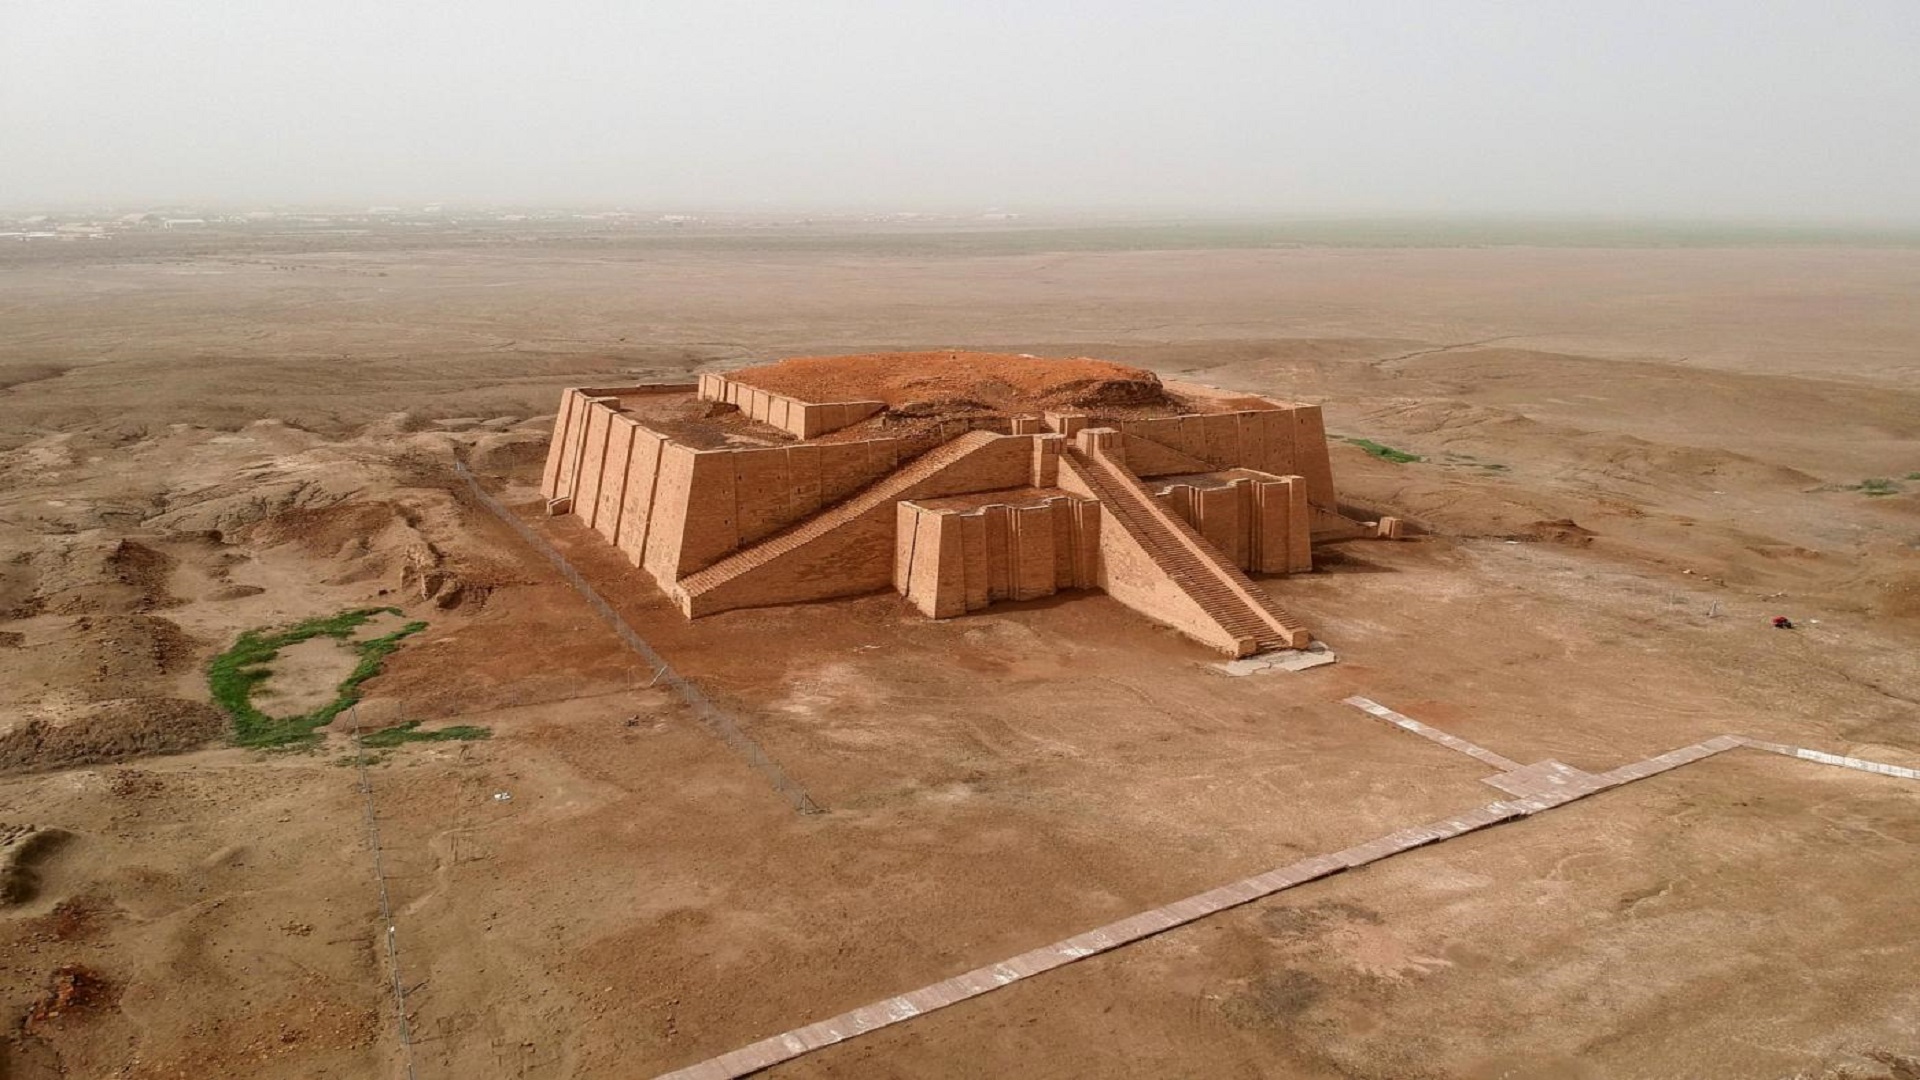  The ziggurat at Ur was a temple to the moon god Nannar, and has been dated to the second millennium BC (Reuters)